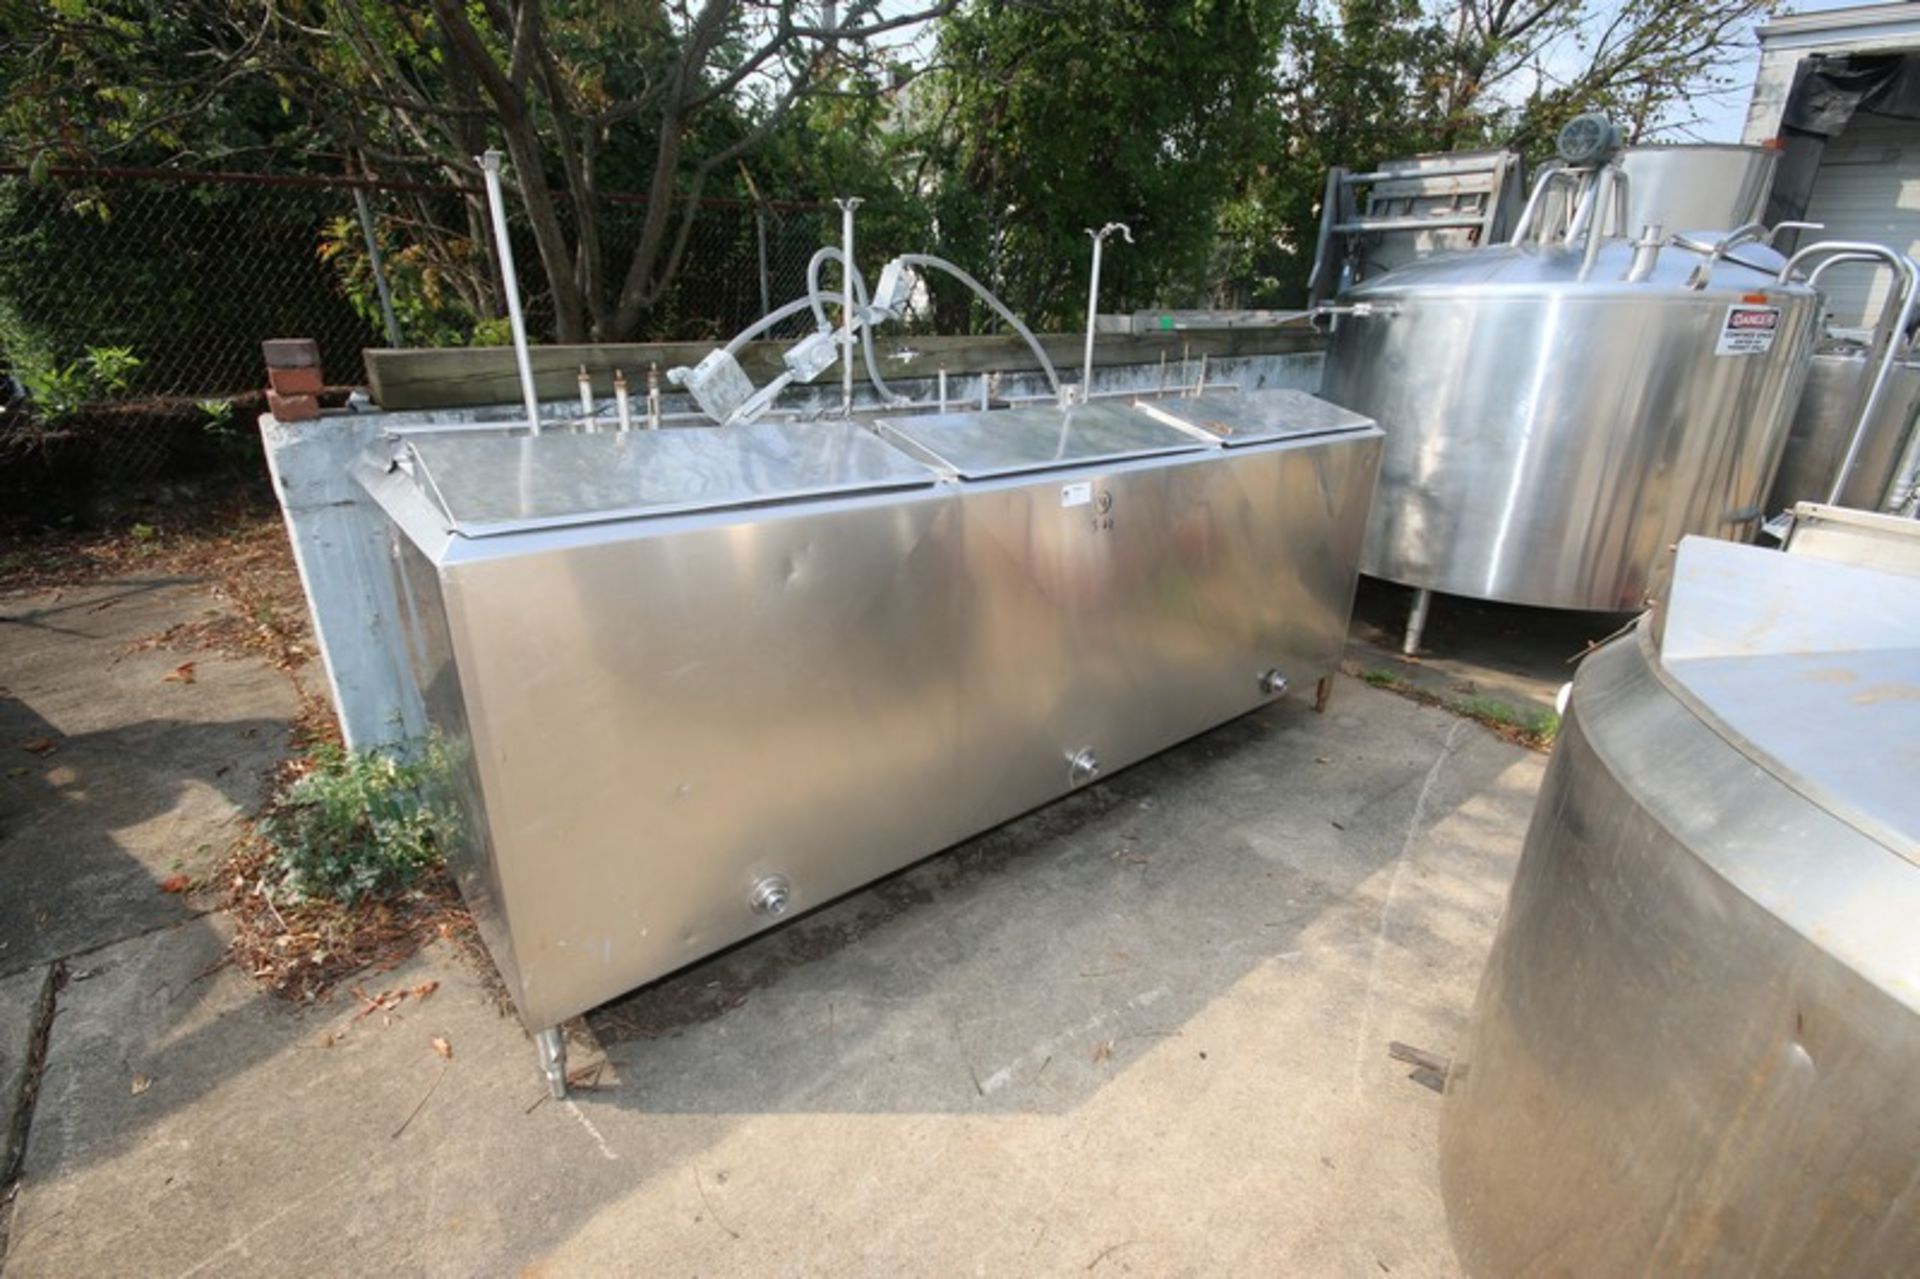 3 Compartment @ Aprox. 50 Gallon, S/S InsulatedFlavor Tank, with Lids, Includes Agitator Shafts, 1.